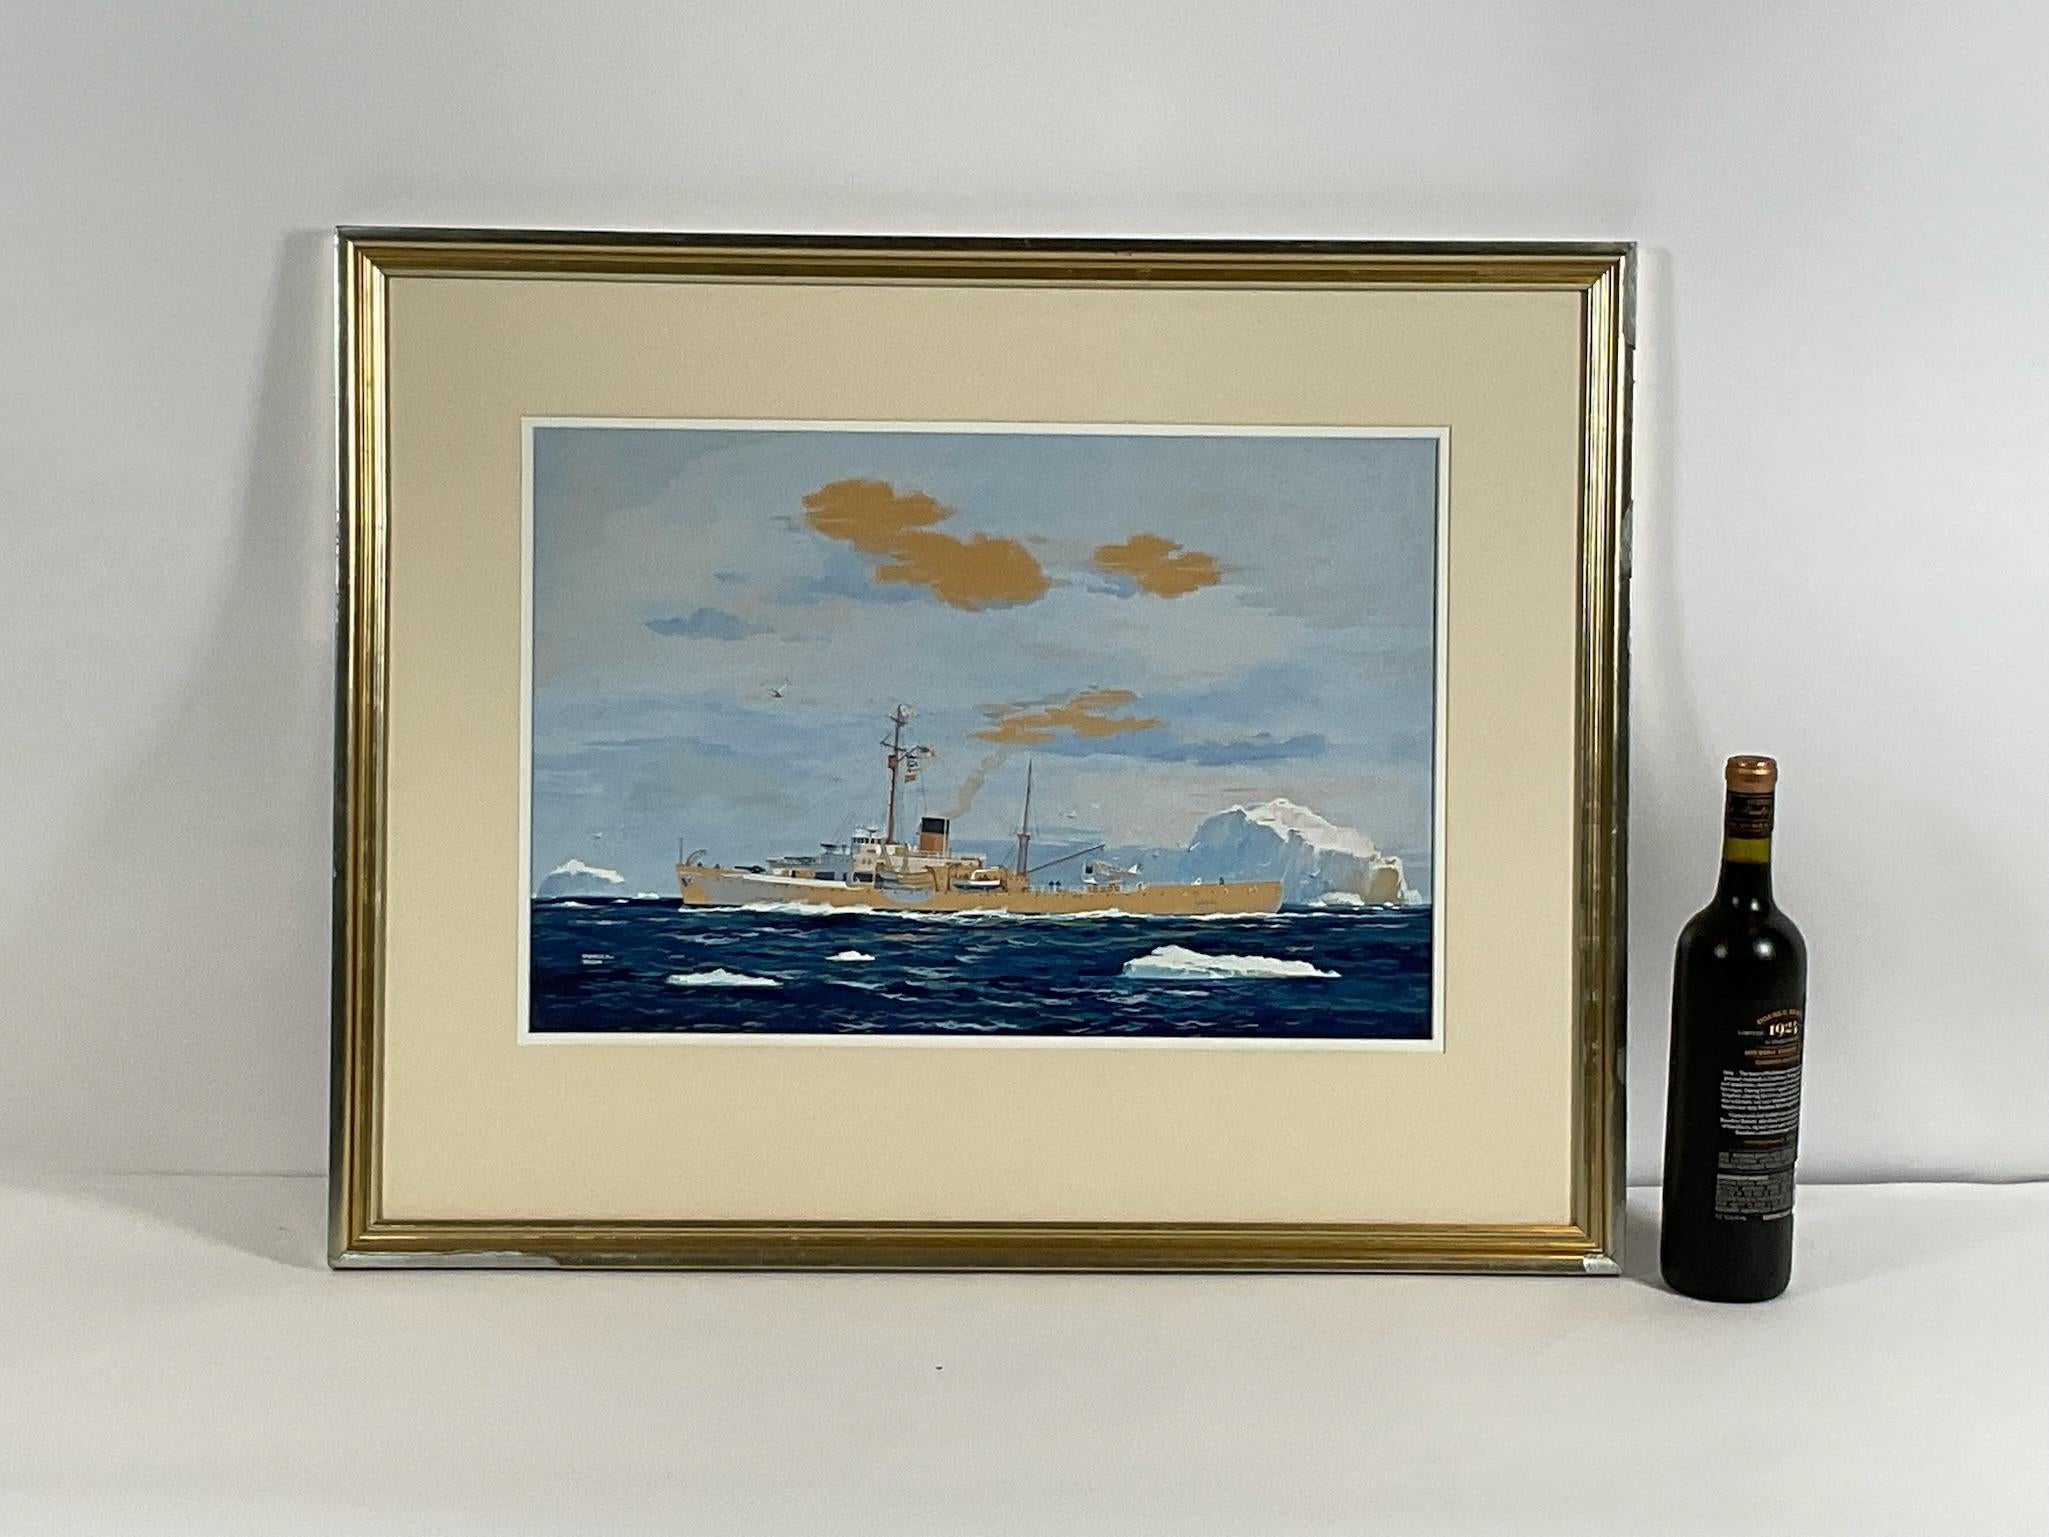 Worden Wood original gouache of the US Coast Guard cutter George W. Campbell (WPG 32). Very colorful work showing a seaplane on deck, launches, mast, signal flags, weapon, etc. Icebergs are in the background and foreground, signed lower left. This